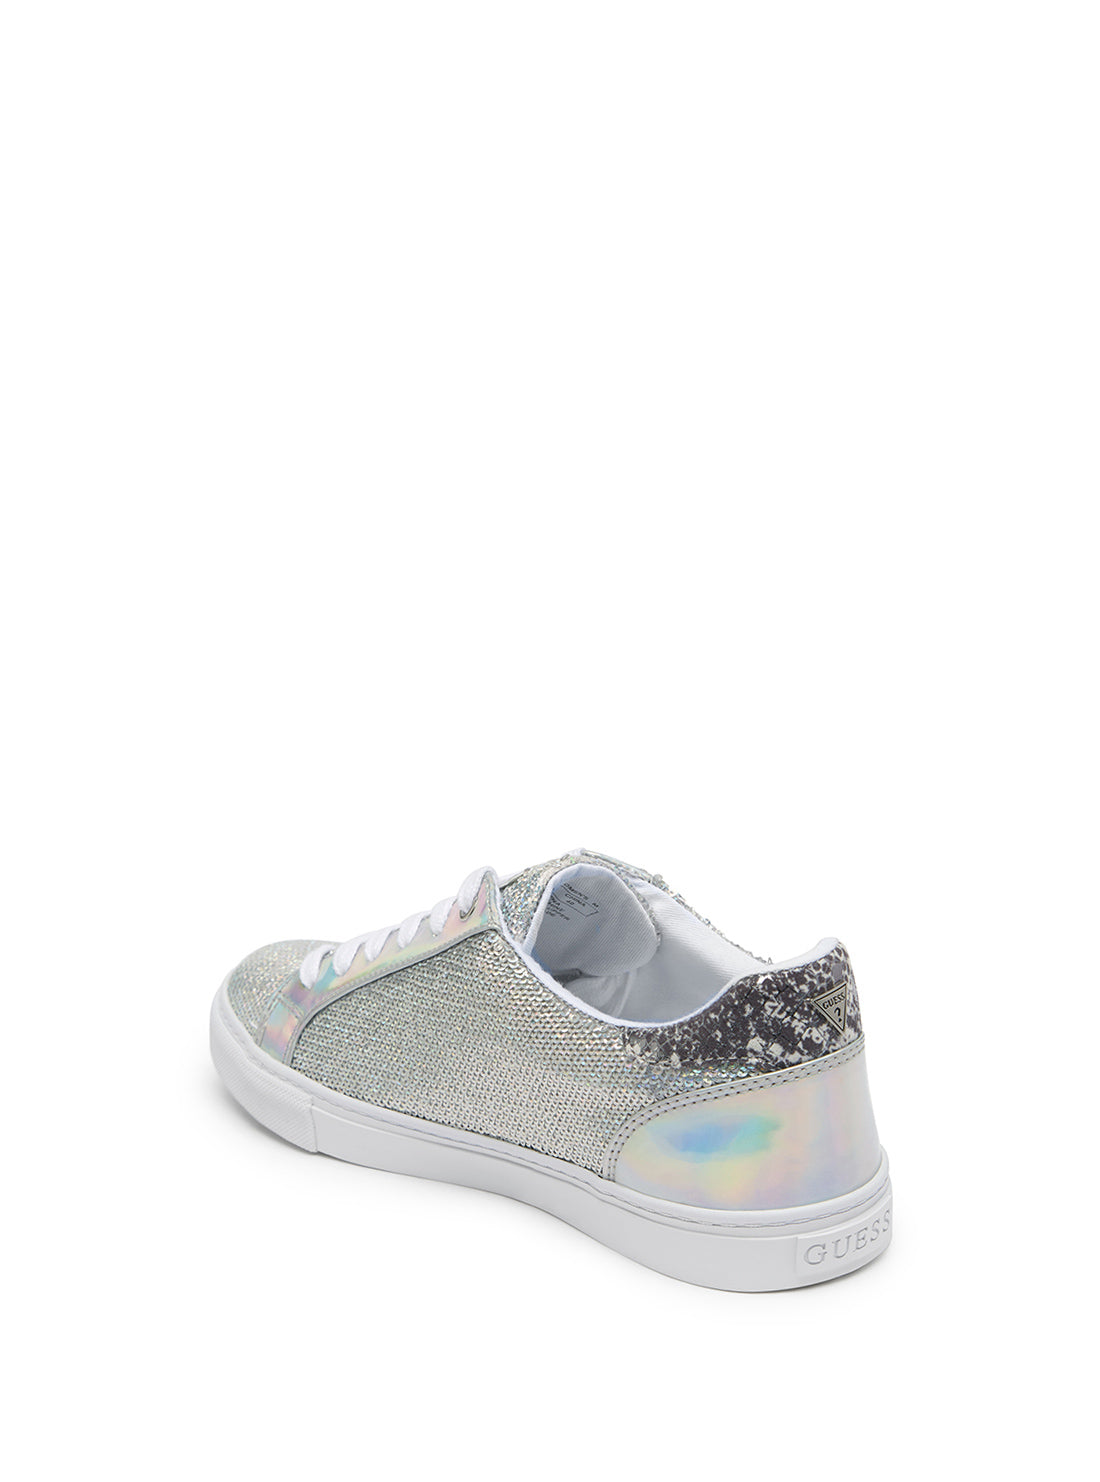 Silver Picks-A Sneakers | GUESS Women's Shoes | back view